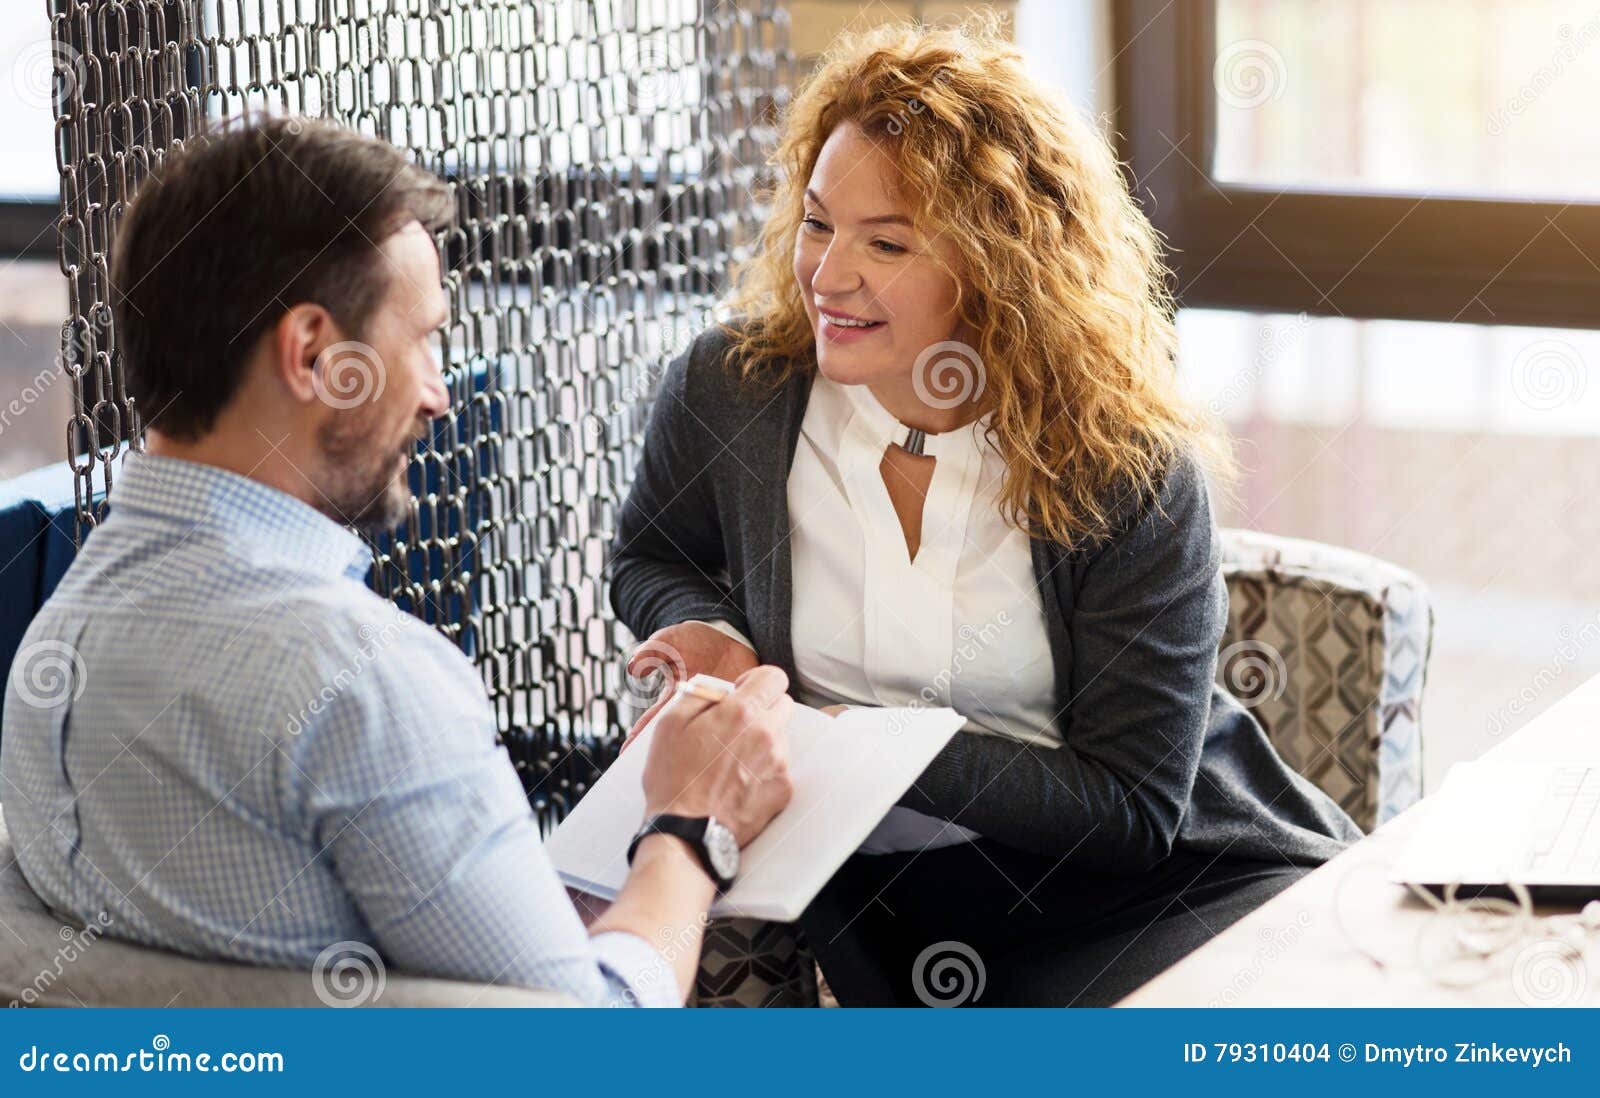 https://thumbs.dreamstime.com/z/woman-talking-to-man-taking-notes-describing-new-concept-pretty-red-haired-women-men-sitting-against-big-79310404.jpg